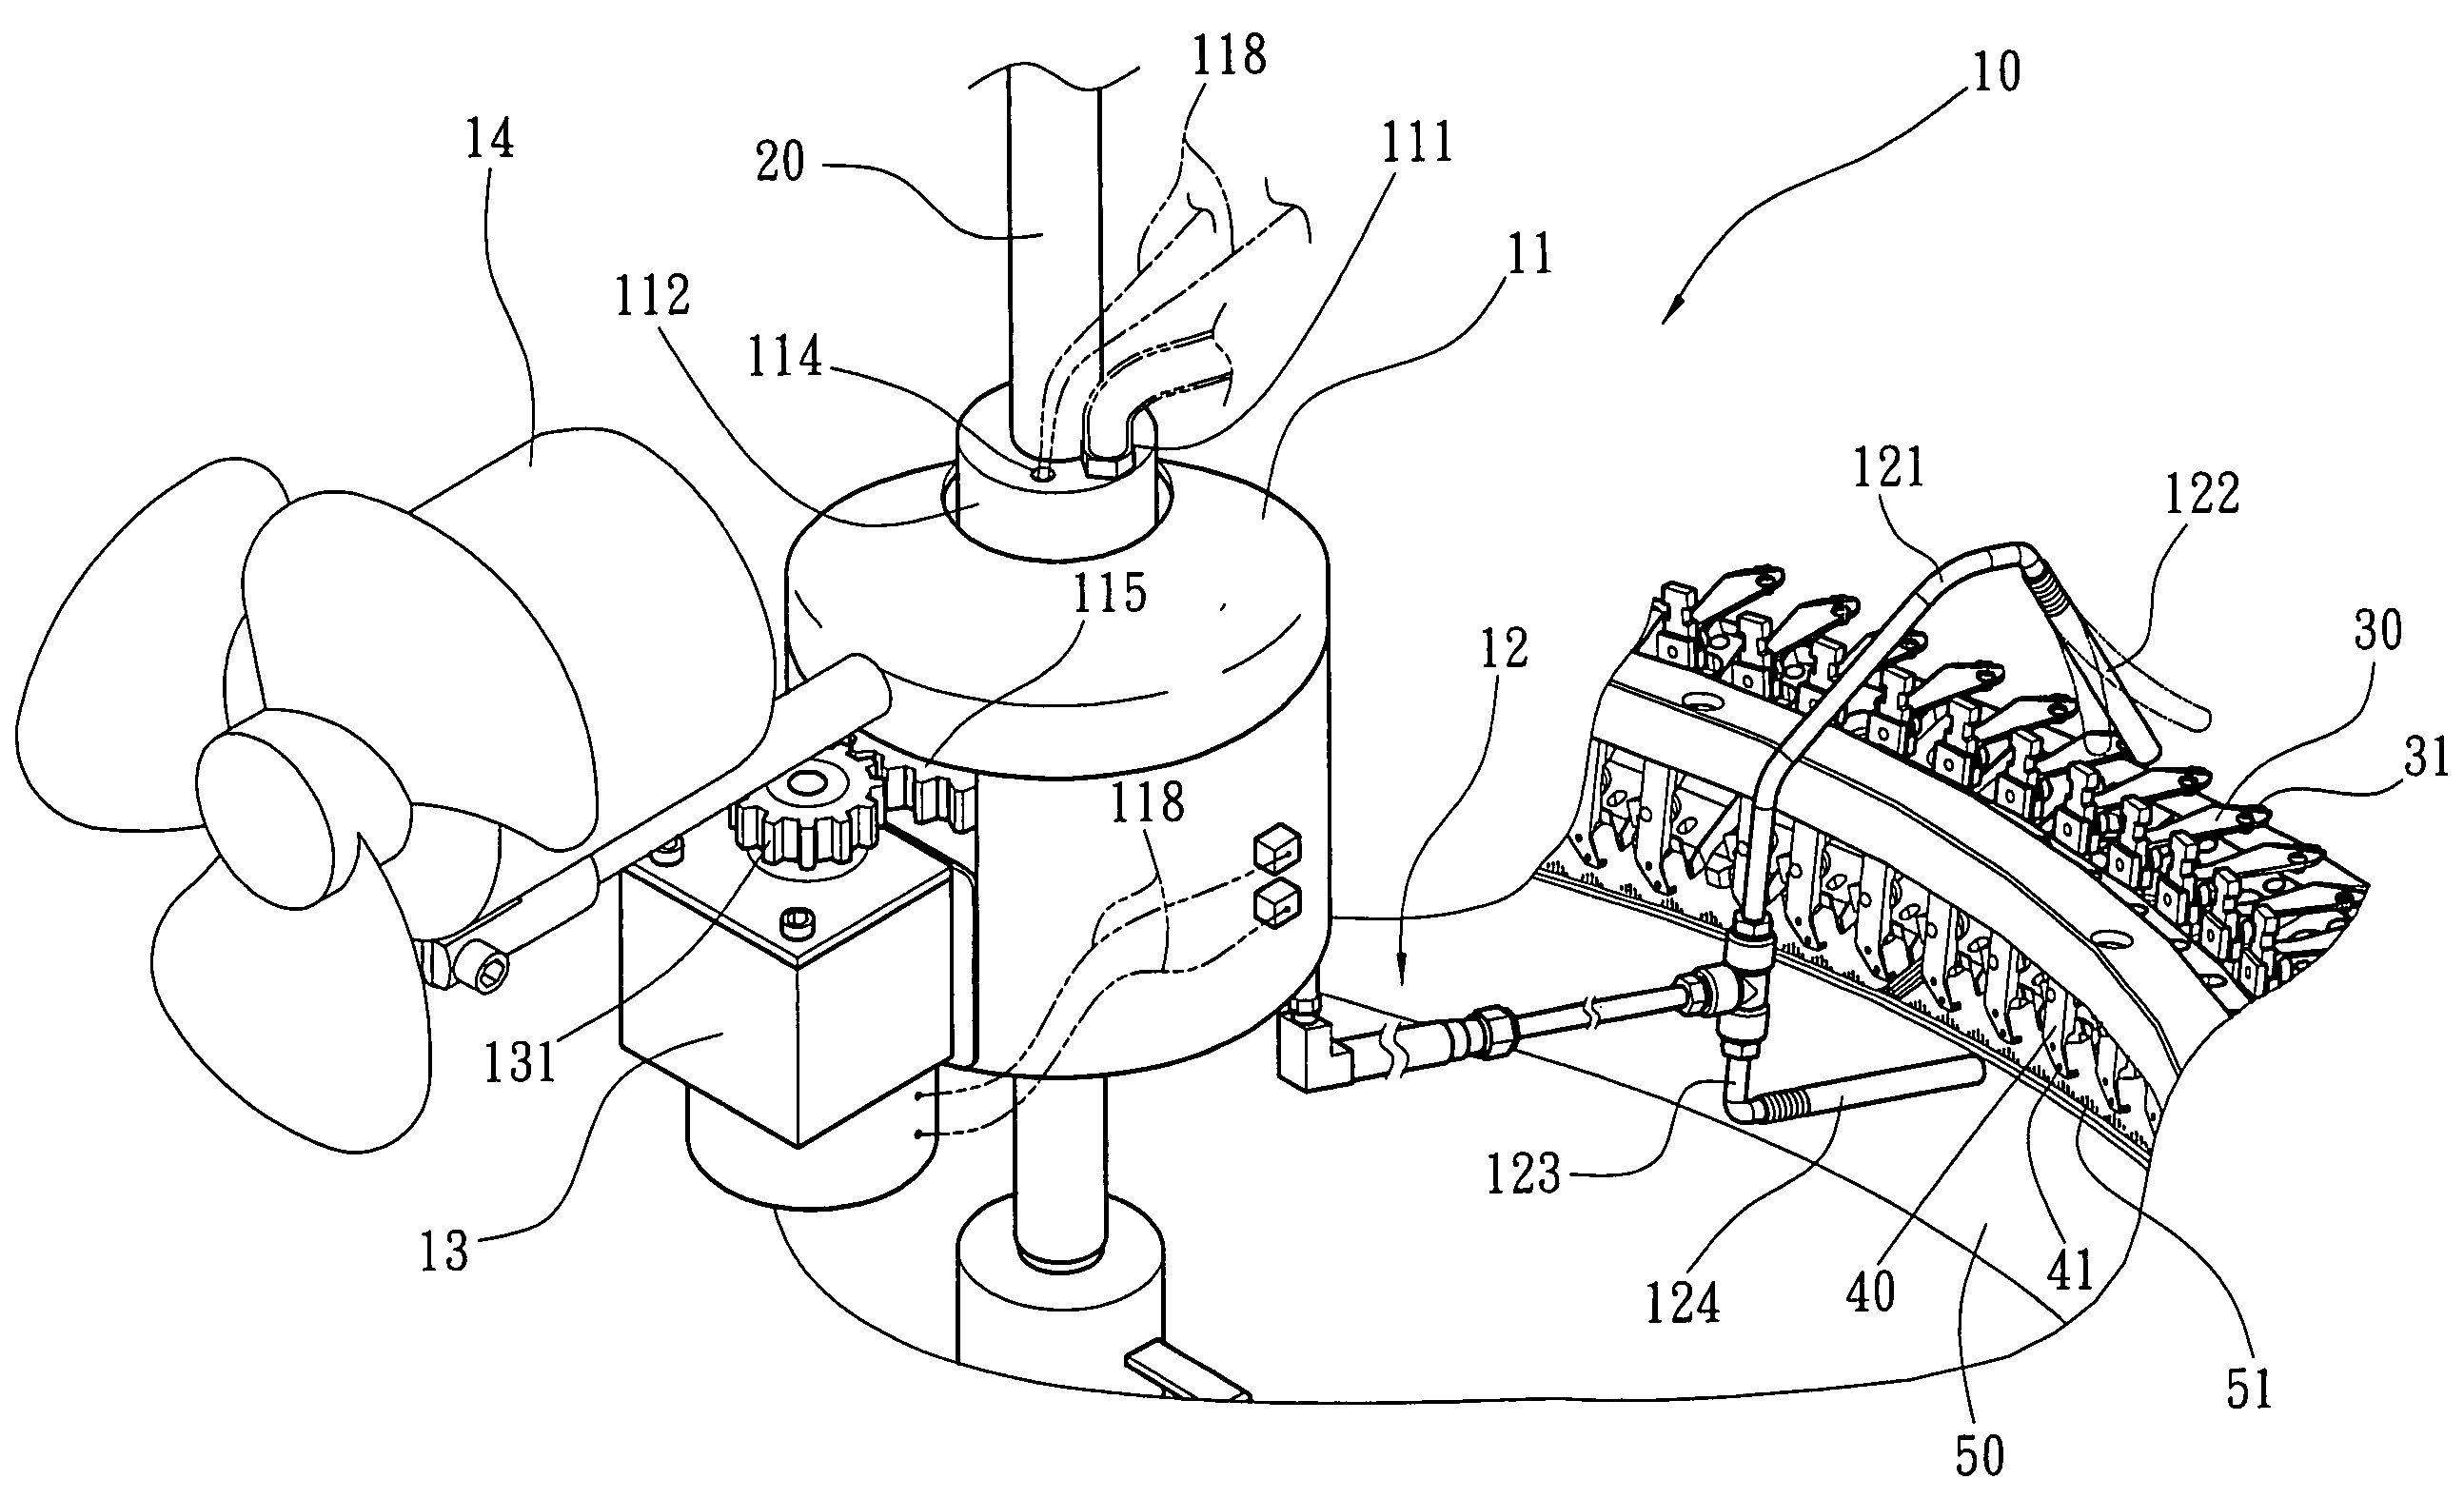 Fiber blowing and heat dissipating system of single-sided circular knitting machine